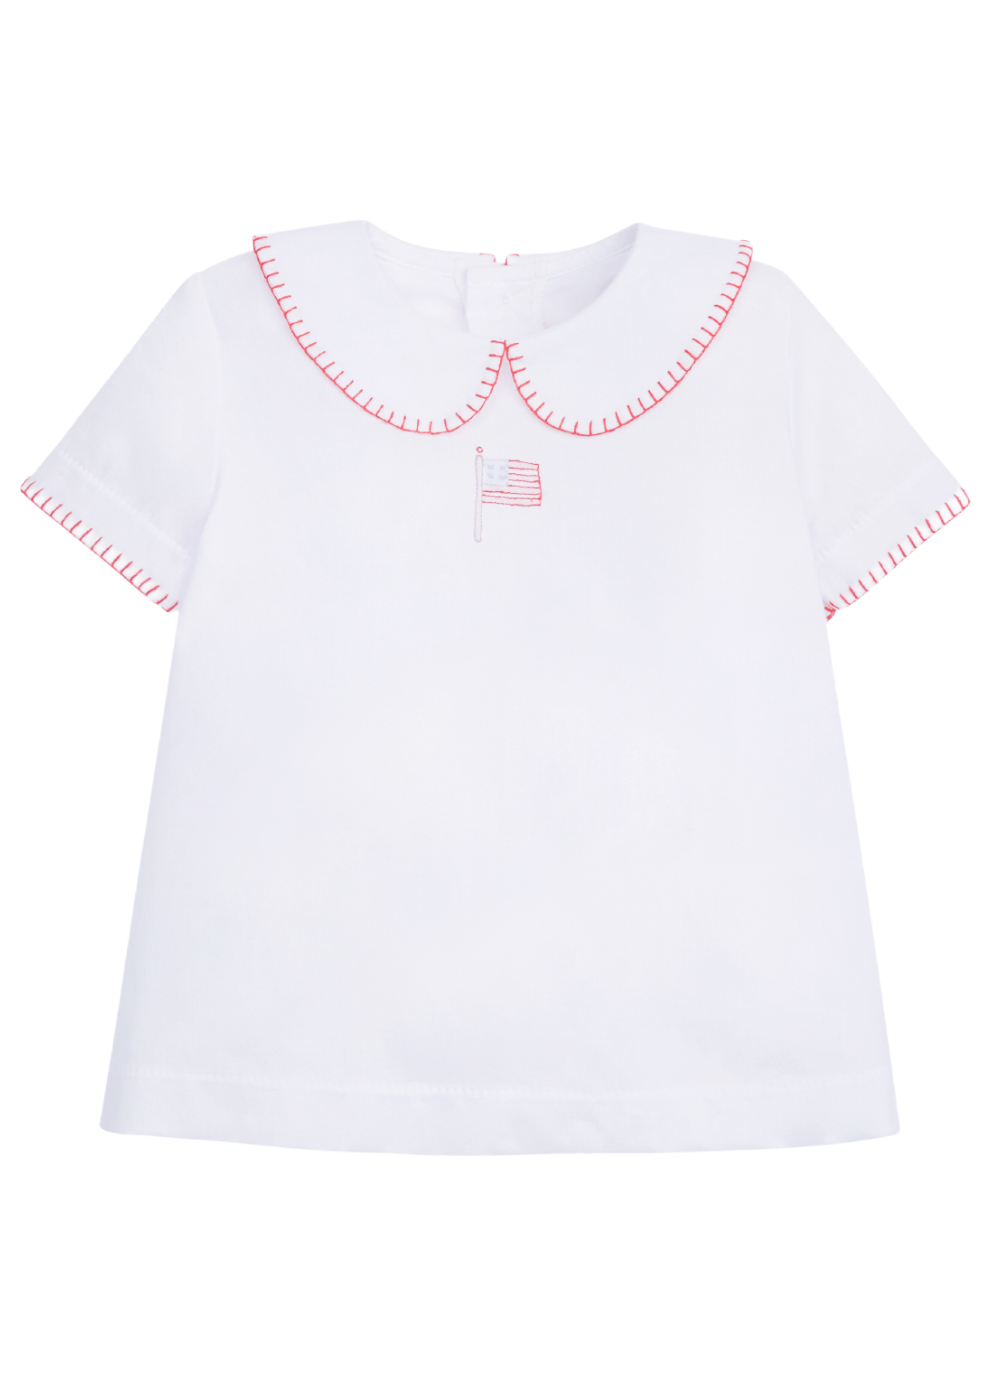 classic childrens clothing boys shirt with peter pan collar, whipstitch detail, and flag embroidery